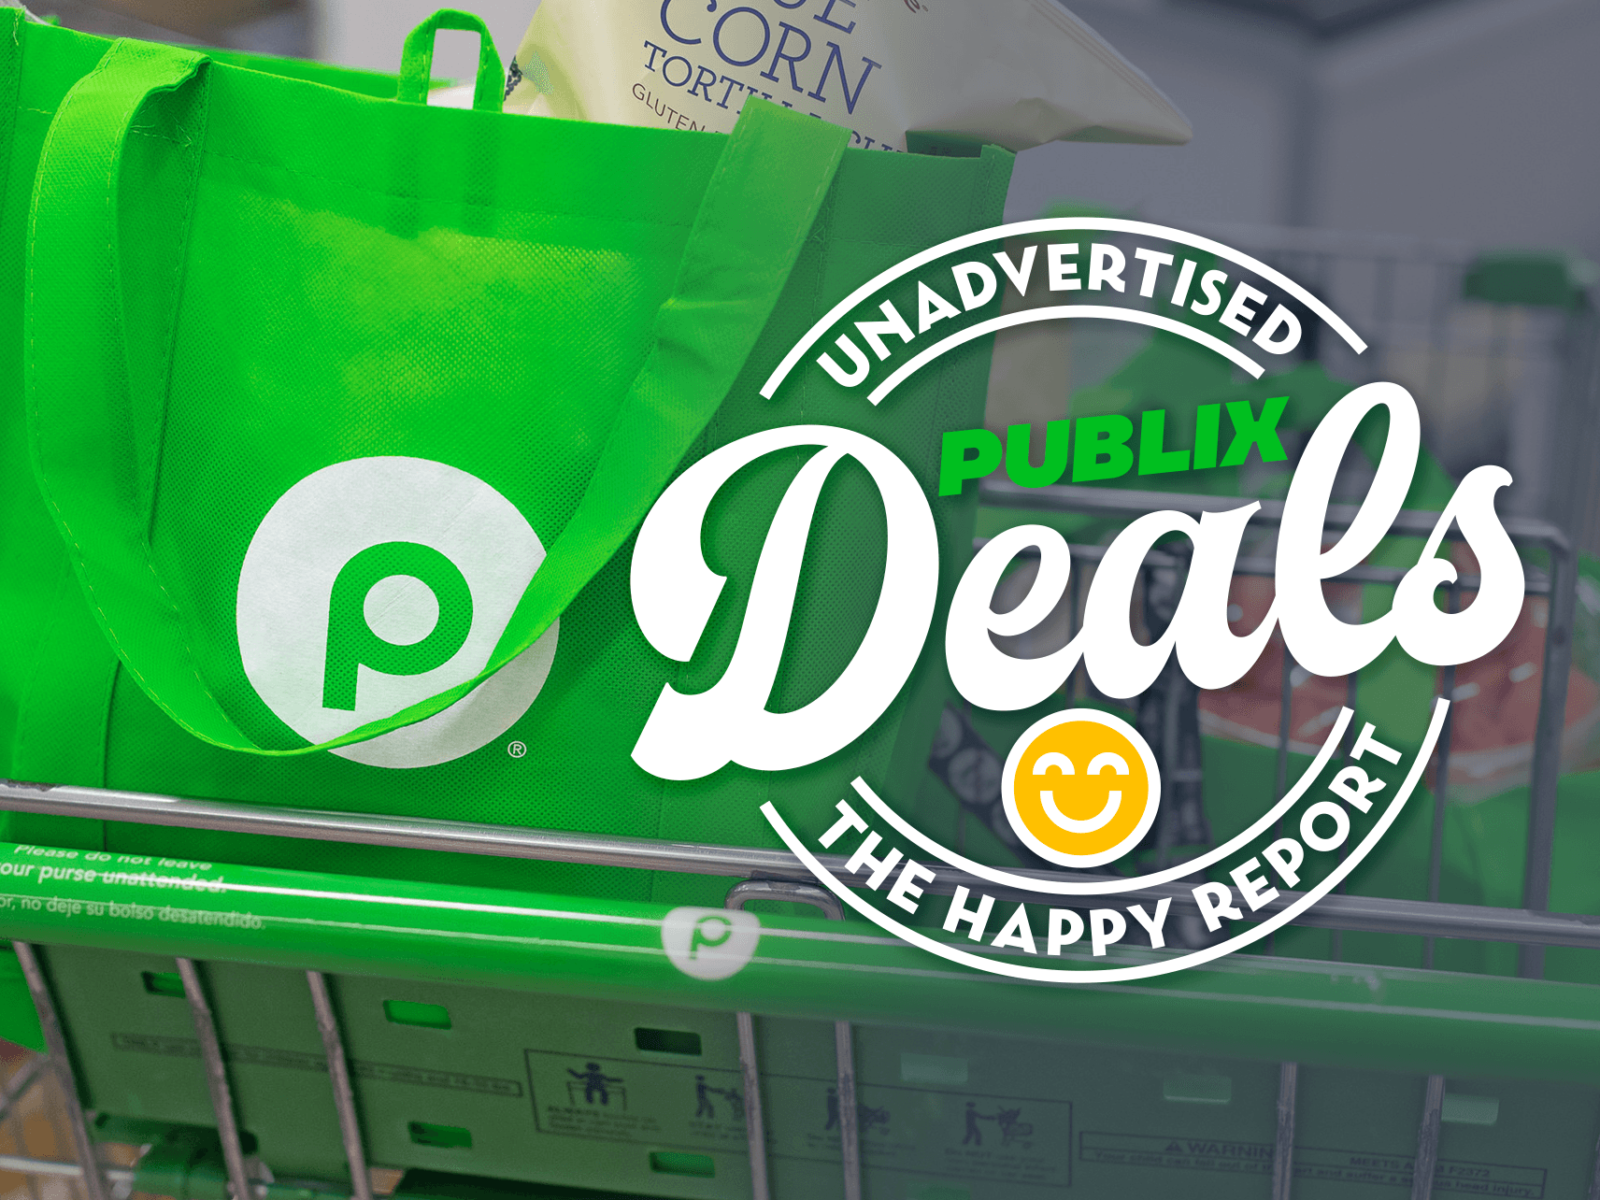 Unadvertised Publix Deals 9/20 – The Happy Report